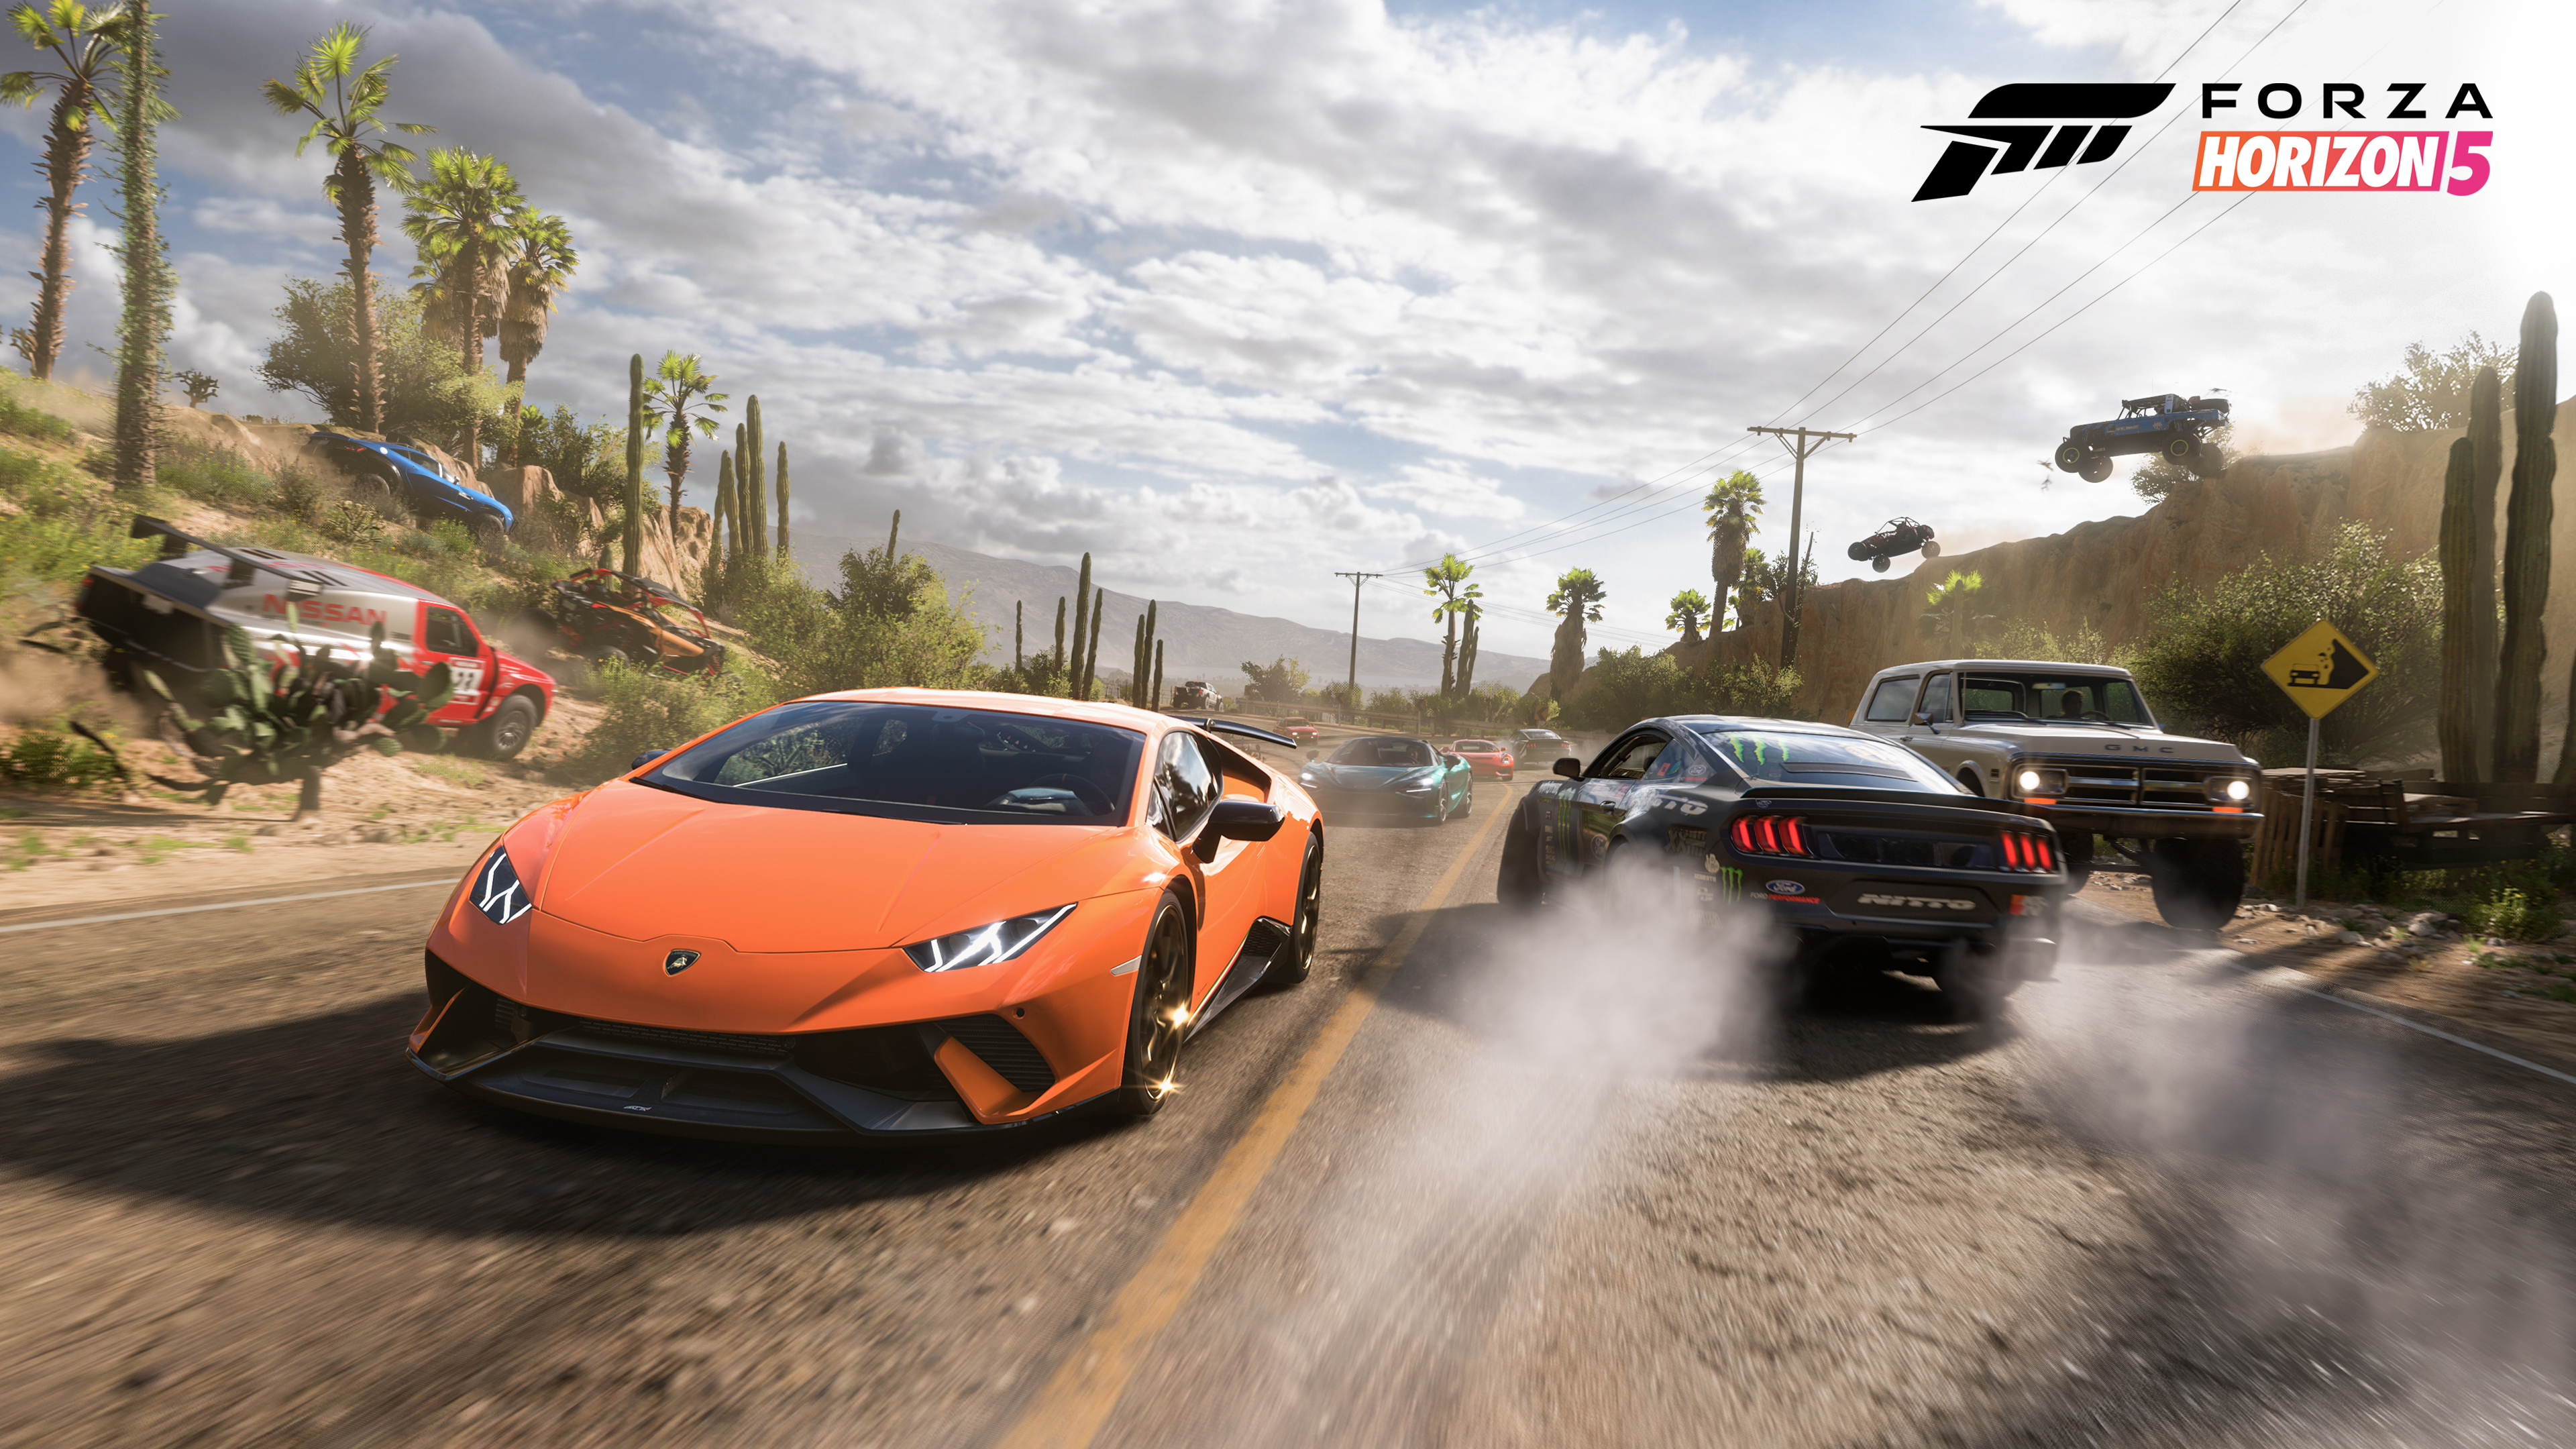 Forza Horizon 5's Rally Adventure map doesn't seem to feature that